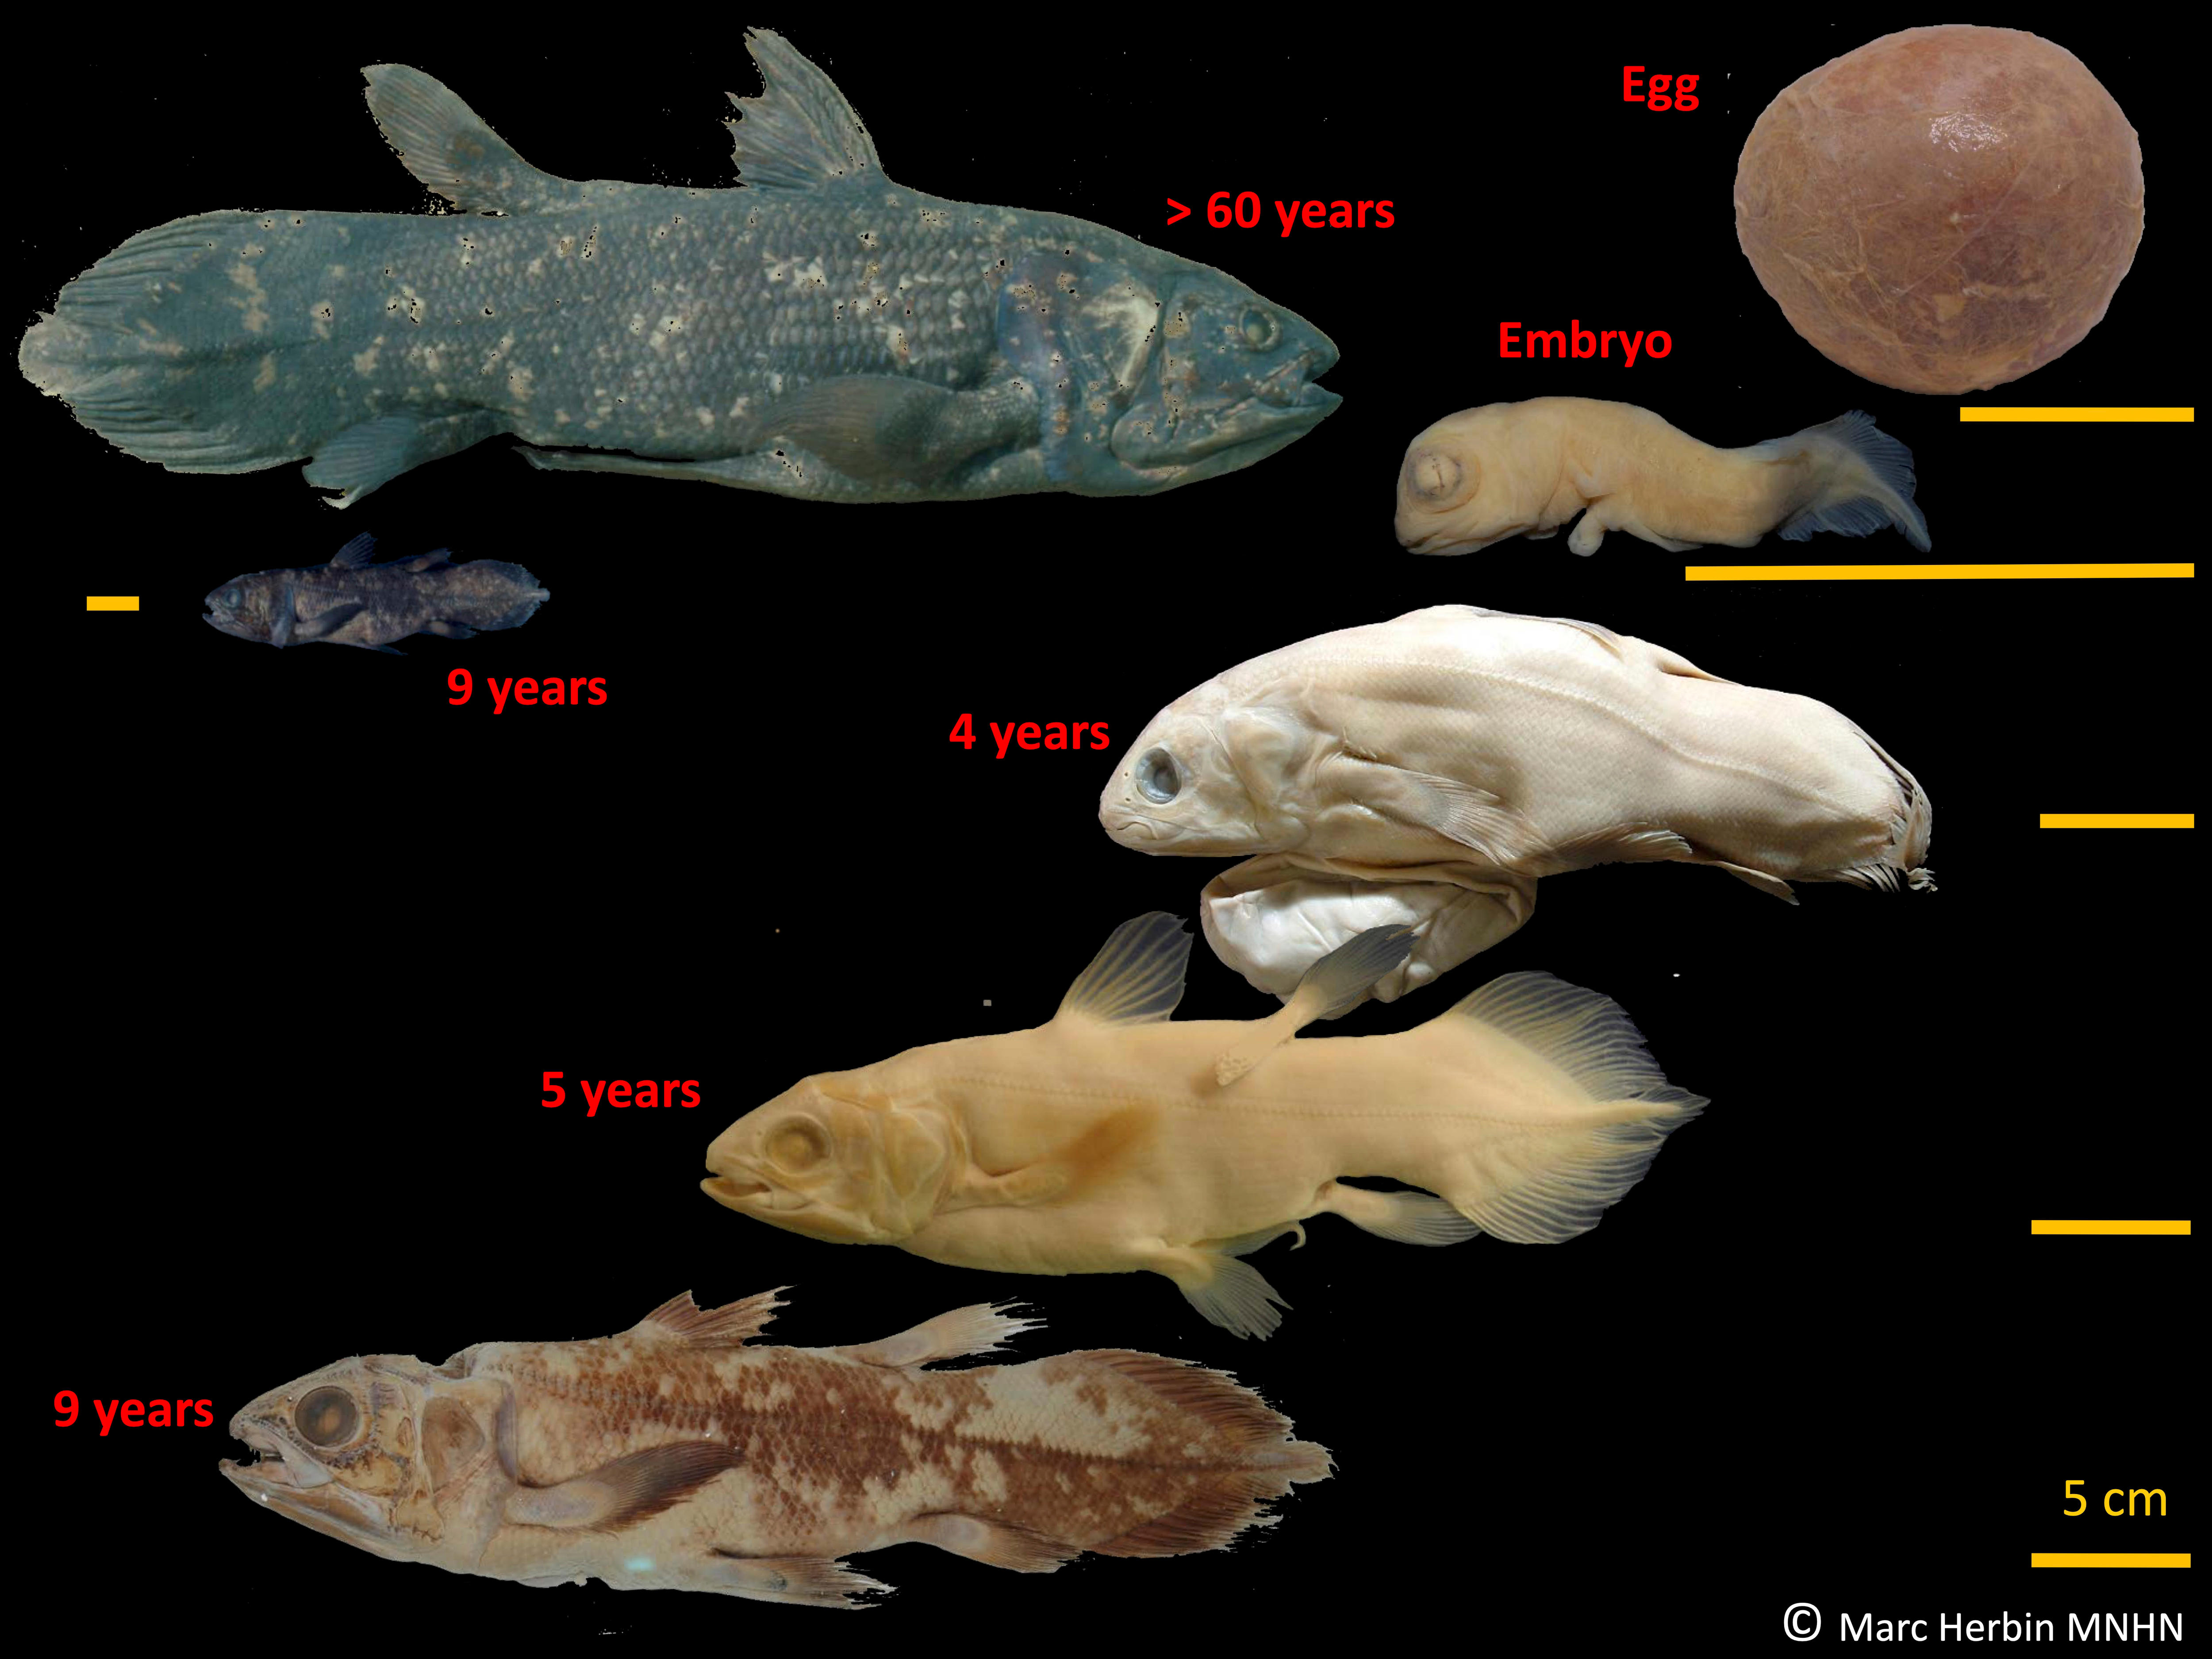 The development stages of the coelacanth fish.